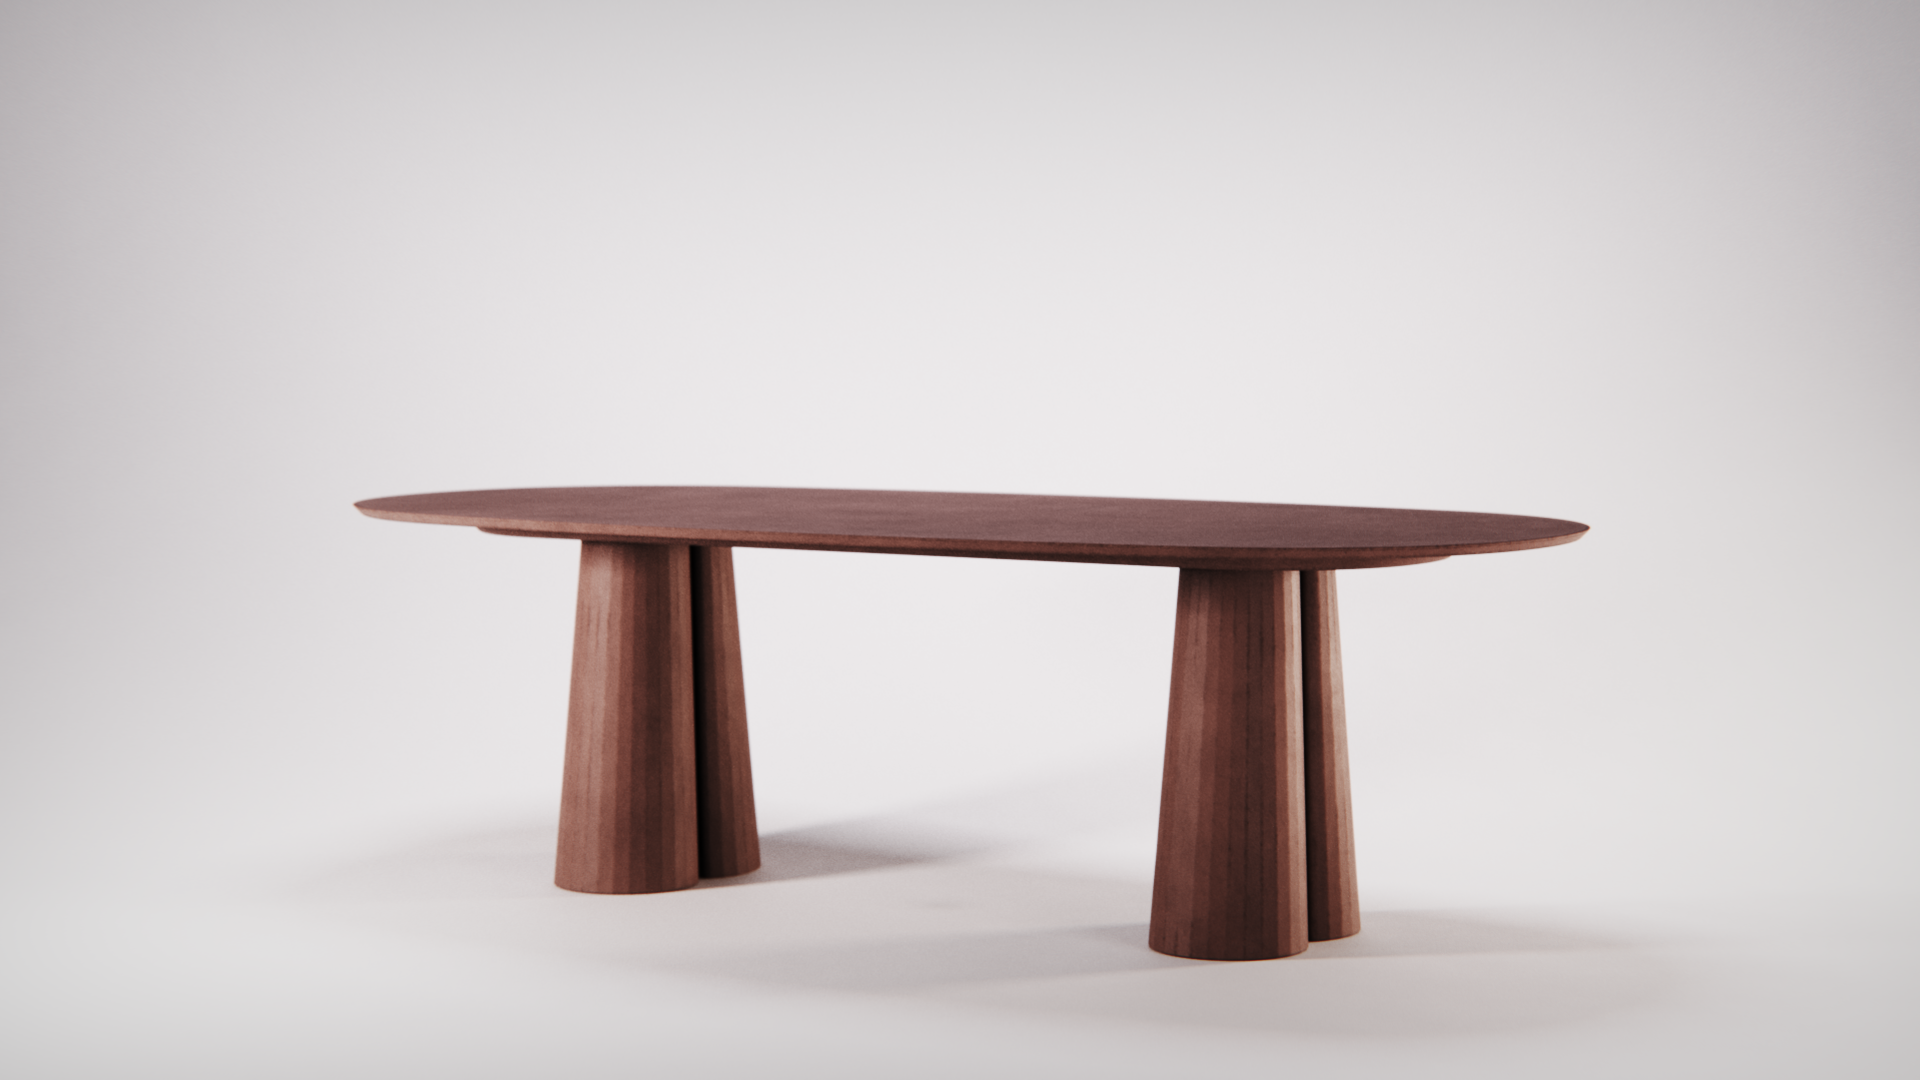 Fusto Oval Dining Table designed by Marialaura Rossiello Studio Irvine 240x120x73 Brick (2).png